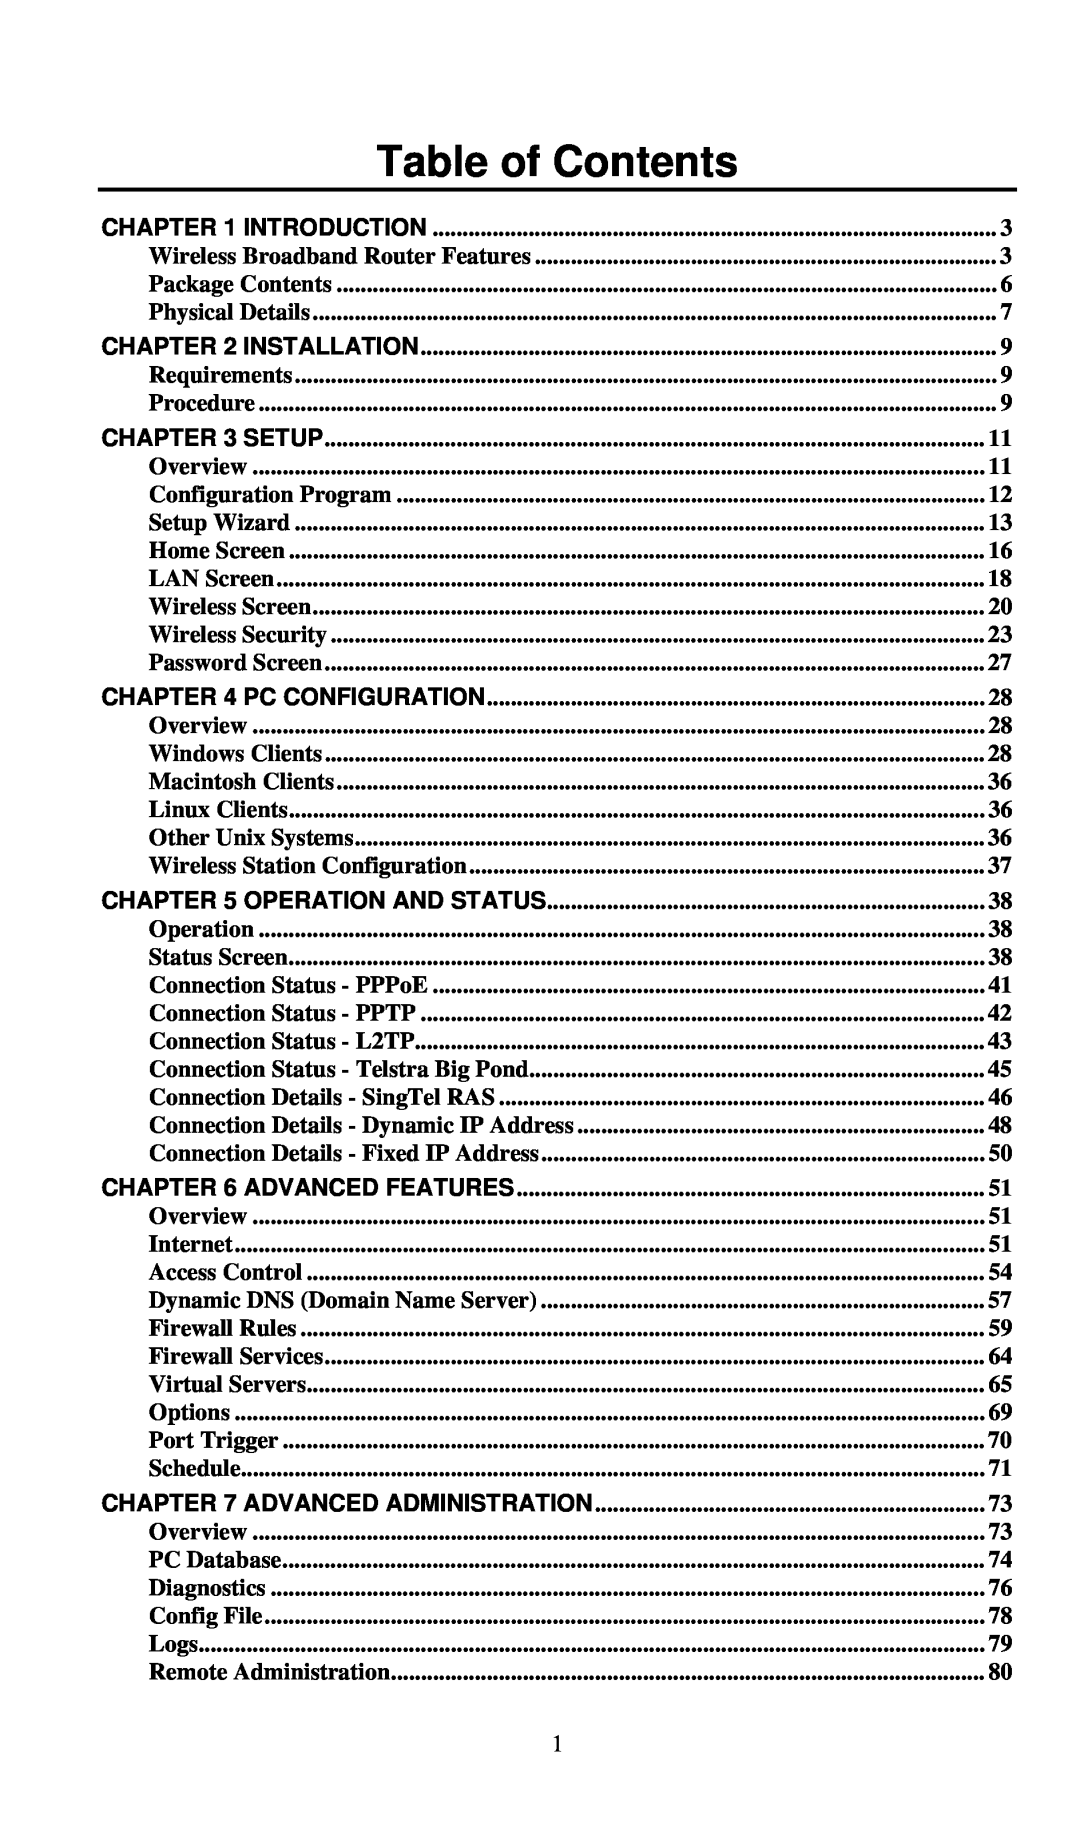 LevelOne WBR-6000 user manual Table of Contents 